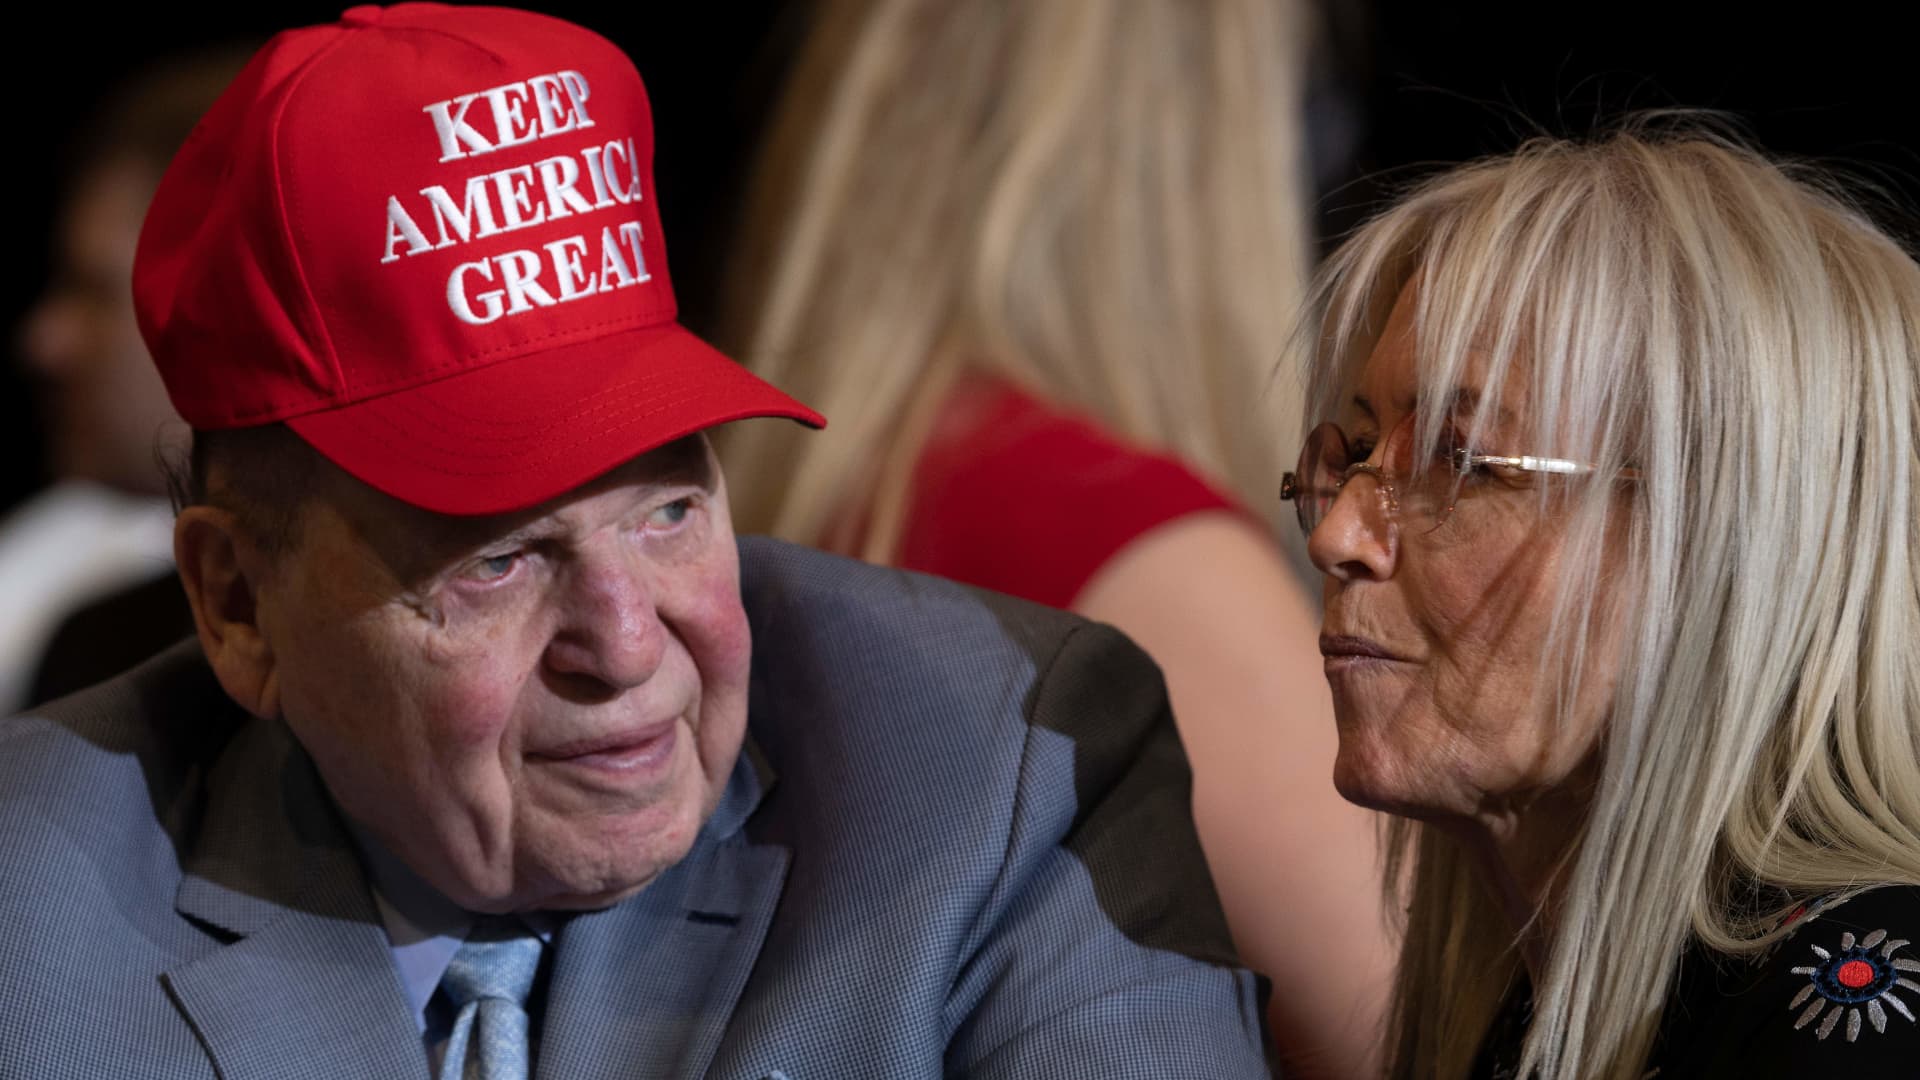 CEO and chairman of casino company Las Vegas Sands Sheldon Adelson (L) listens as US President Donald Trump delivers remarks at a Keep America Great rally in Las Vegas, Nevada, on February 21, 2020.